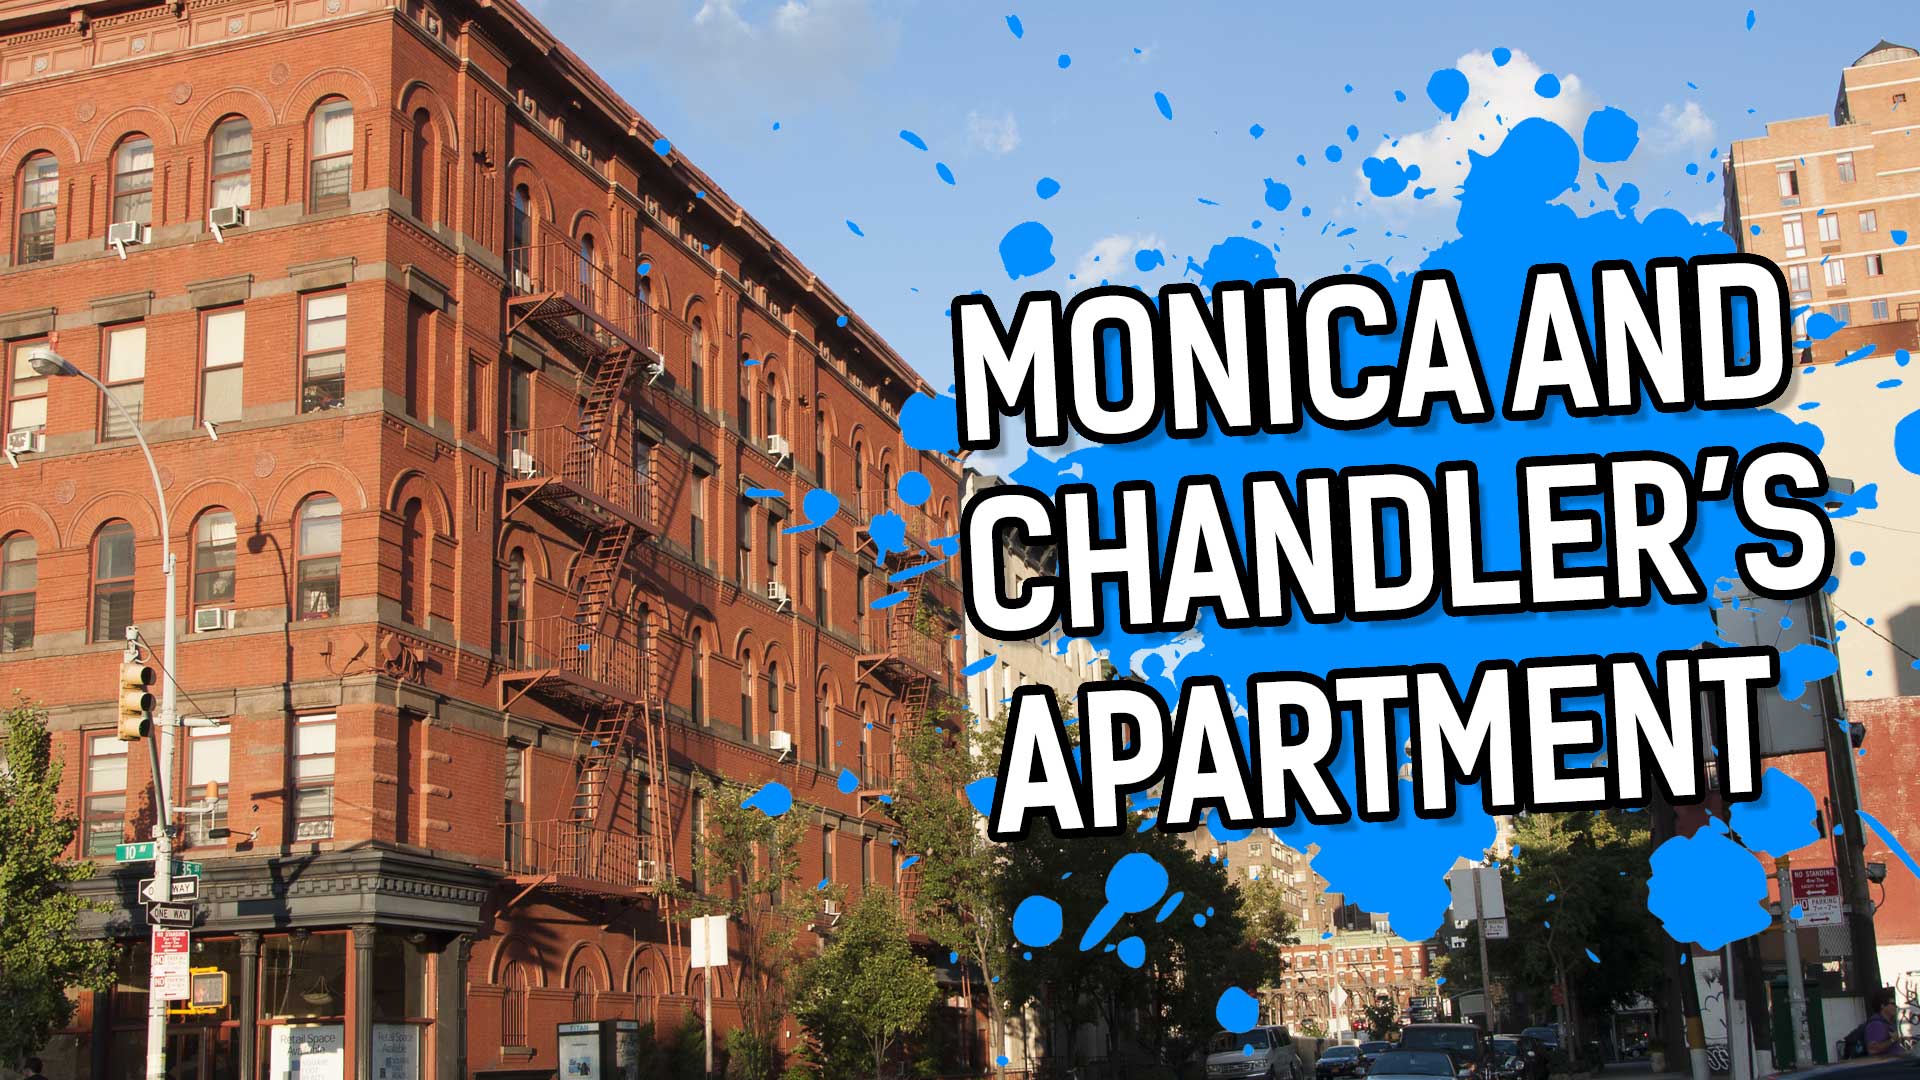 Monica and Chandler's apartment!